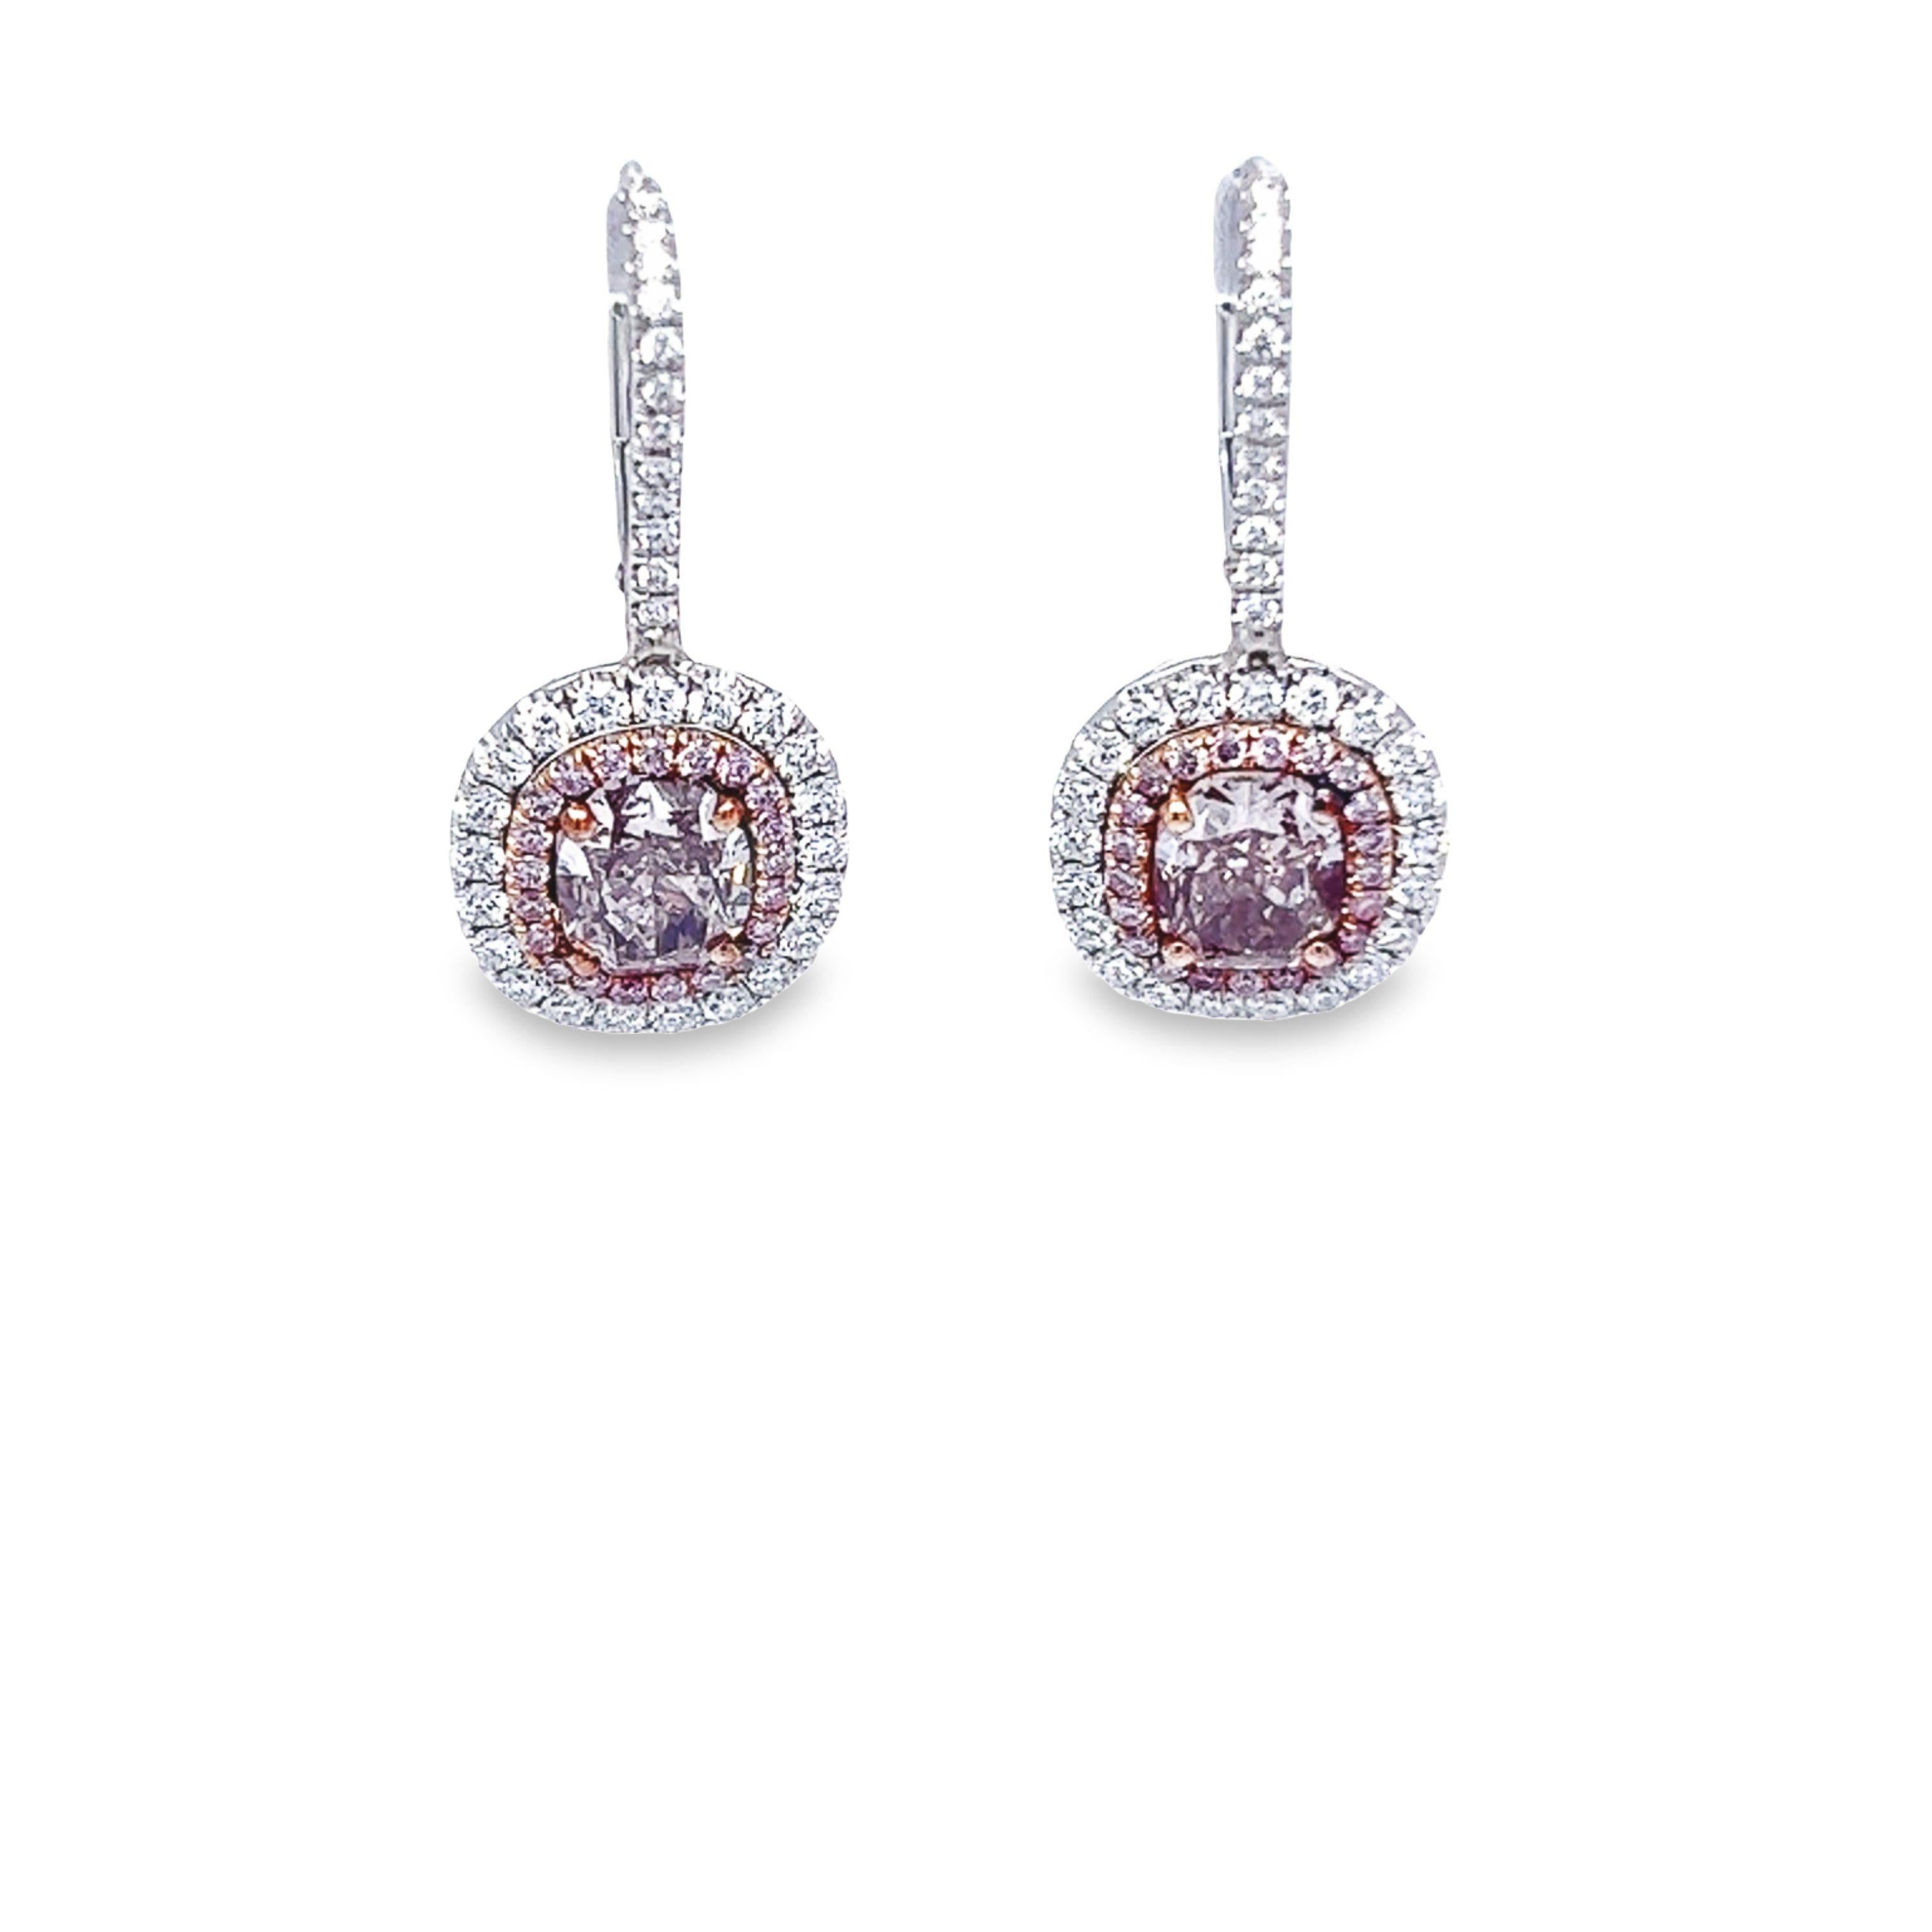 A beautifully matched 2.08 total carat weight Cushion Fancy Brownish Pink SI1-SI2 clarity diamond earrings are GIA Certified. These gorgeous light weight dangling earrings are set in 18k white & rose gold also with an elegant micro pave pink & white